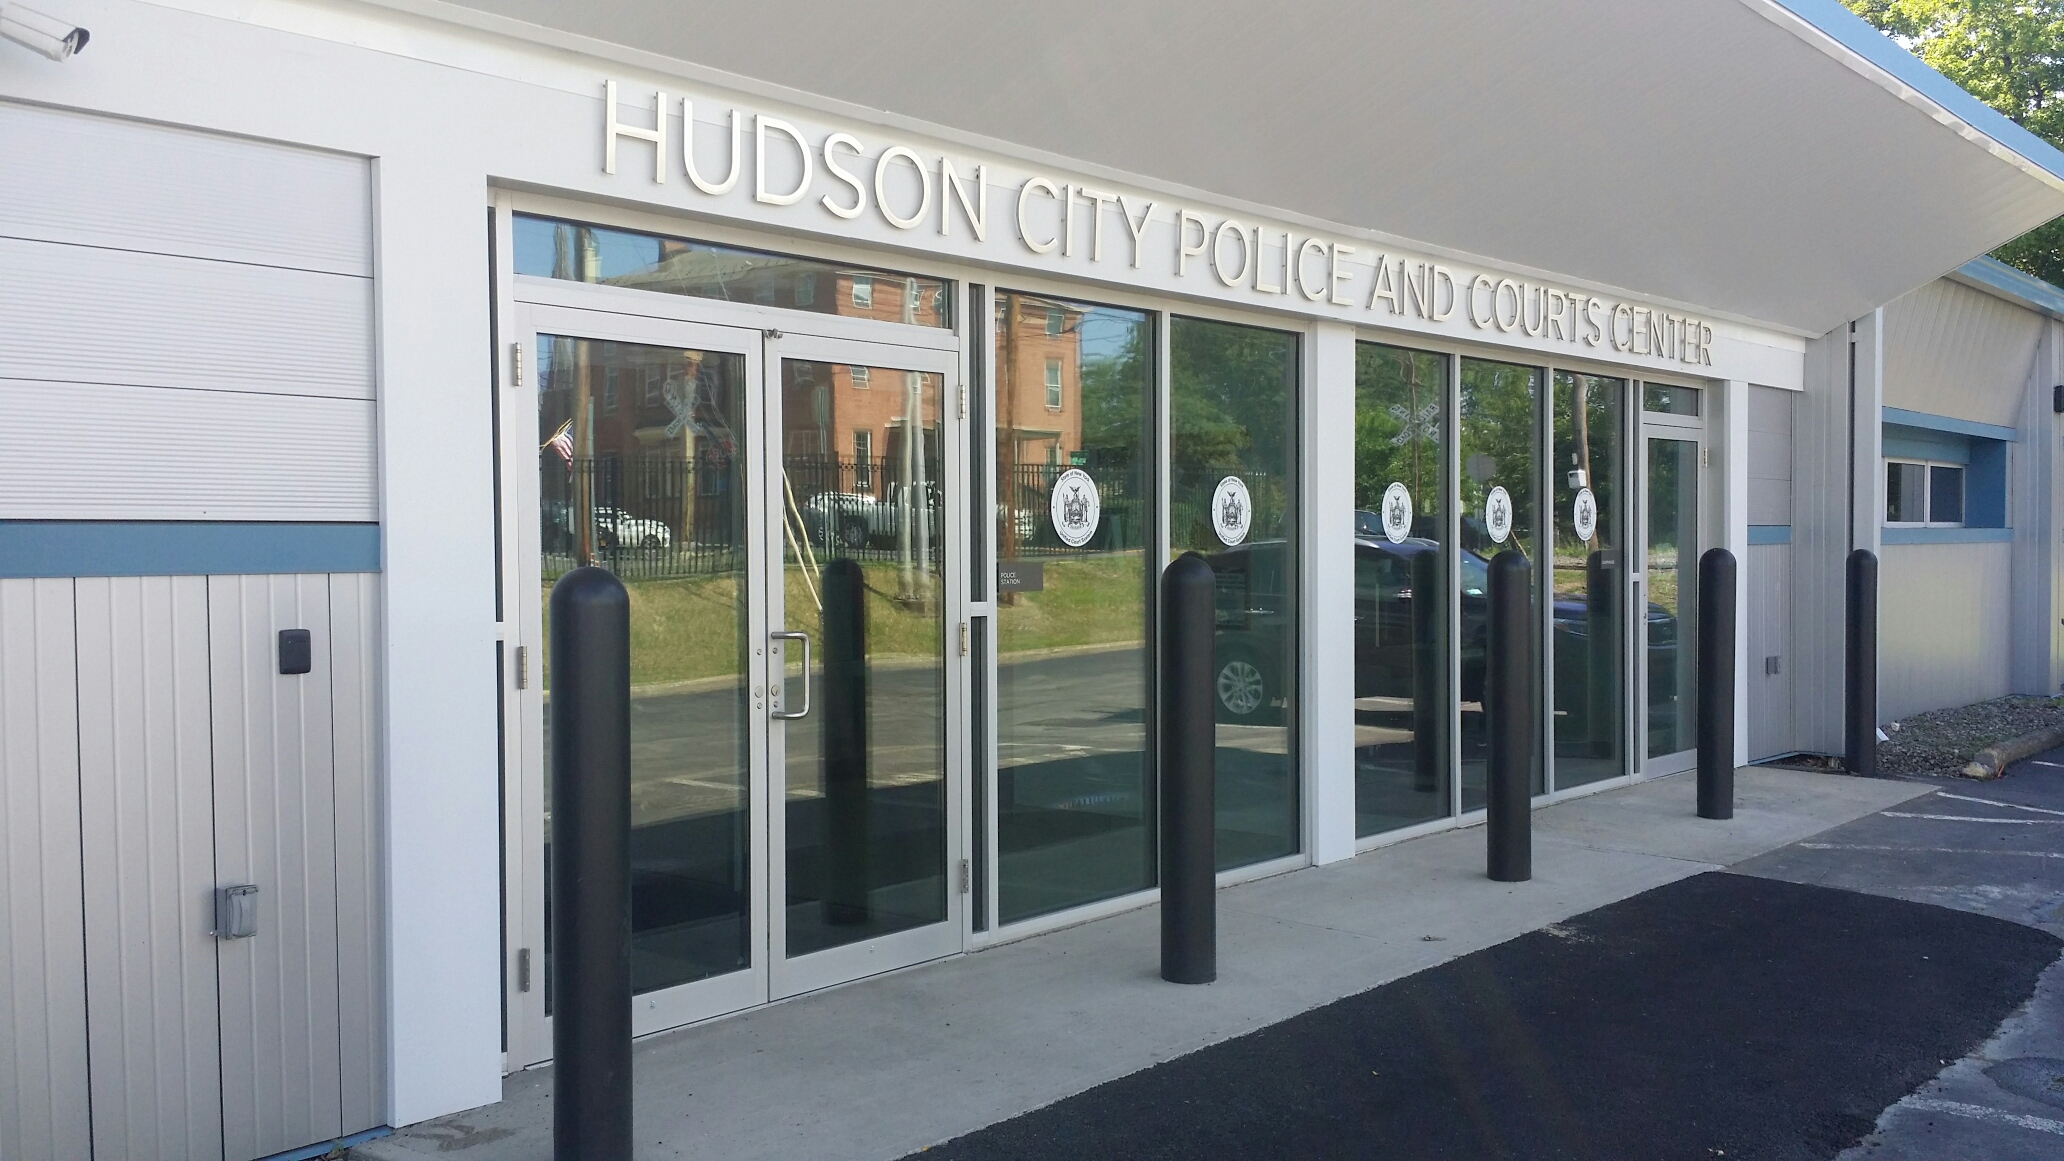 Entrance to the Hudson City Police and Courts Center. There's a set of doors on street level to the left of the entrance. There are also black poles coming up from the ground that are 6 to 10 feet apart. These poles are lining the length of the entry area.